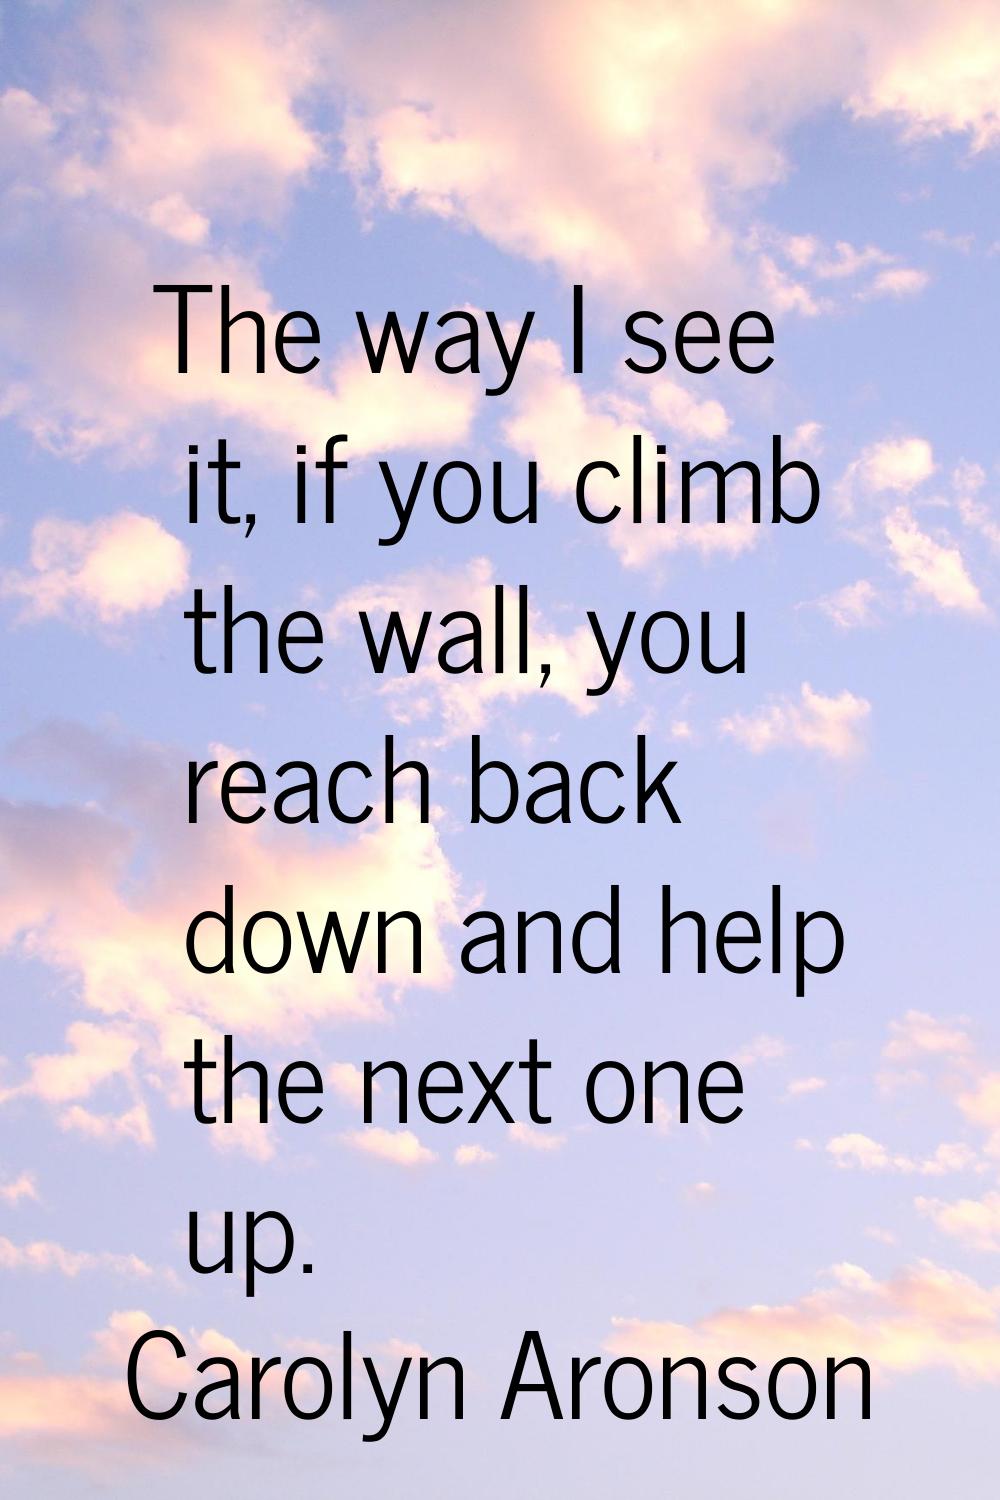 The way I see it, if you climb the wall, you reach back down and help the next one up.